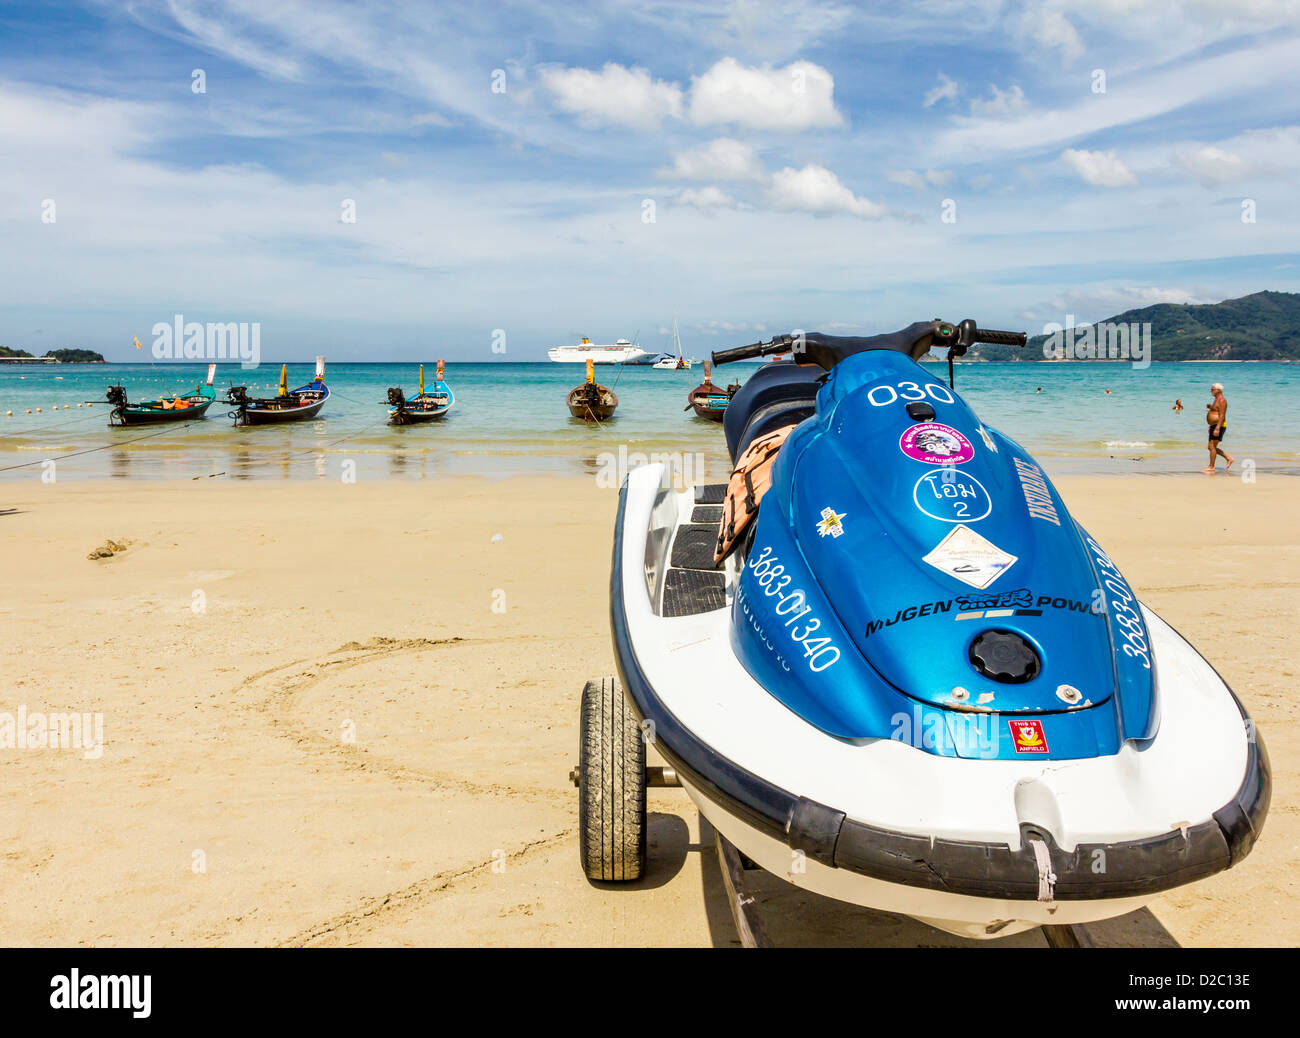 Personal watercraft for hire on the beach at Phuket, Thailand Stock Photo